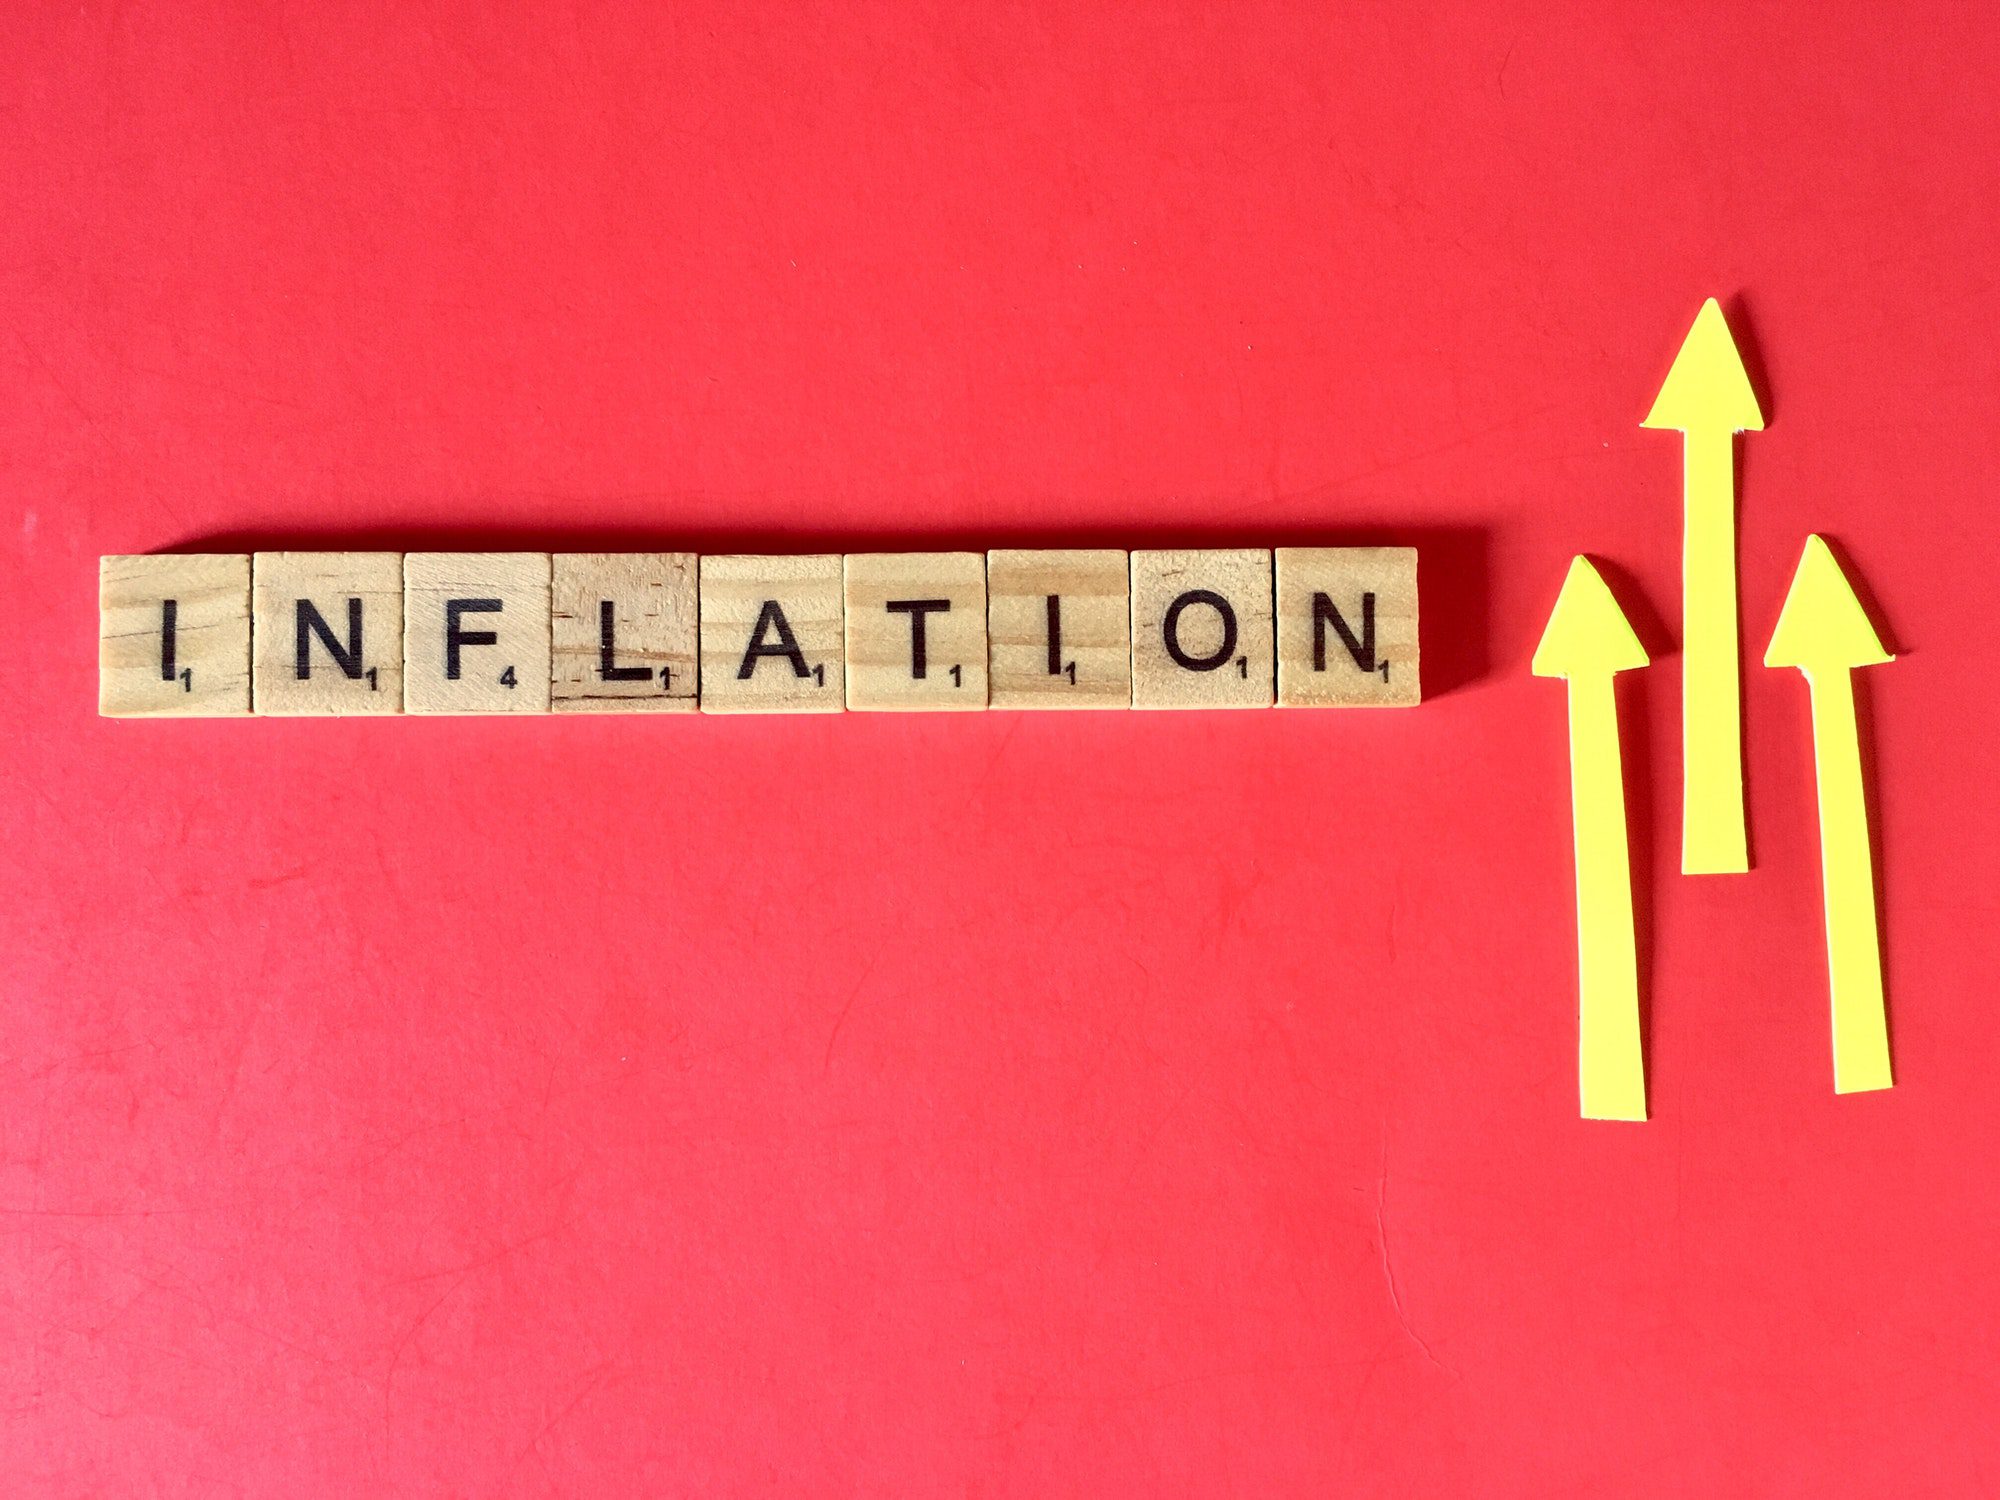 Inflation spelled out with wooden blocks on red background, referring to the Medicare Premium increases.